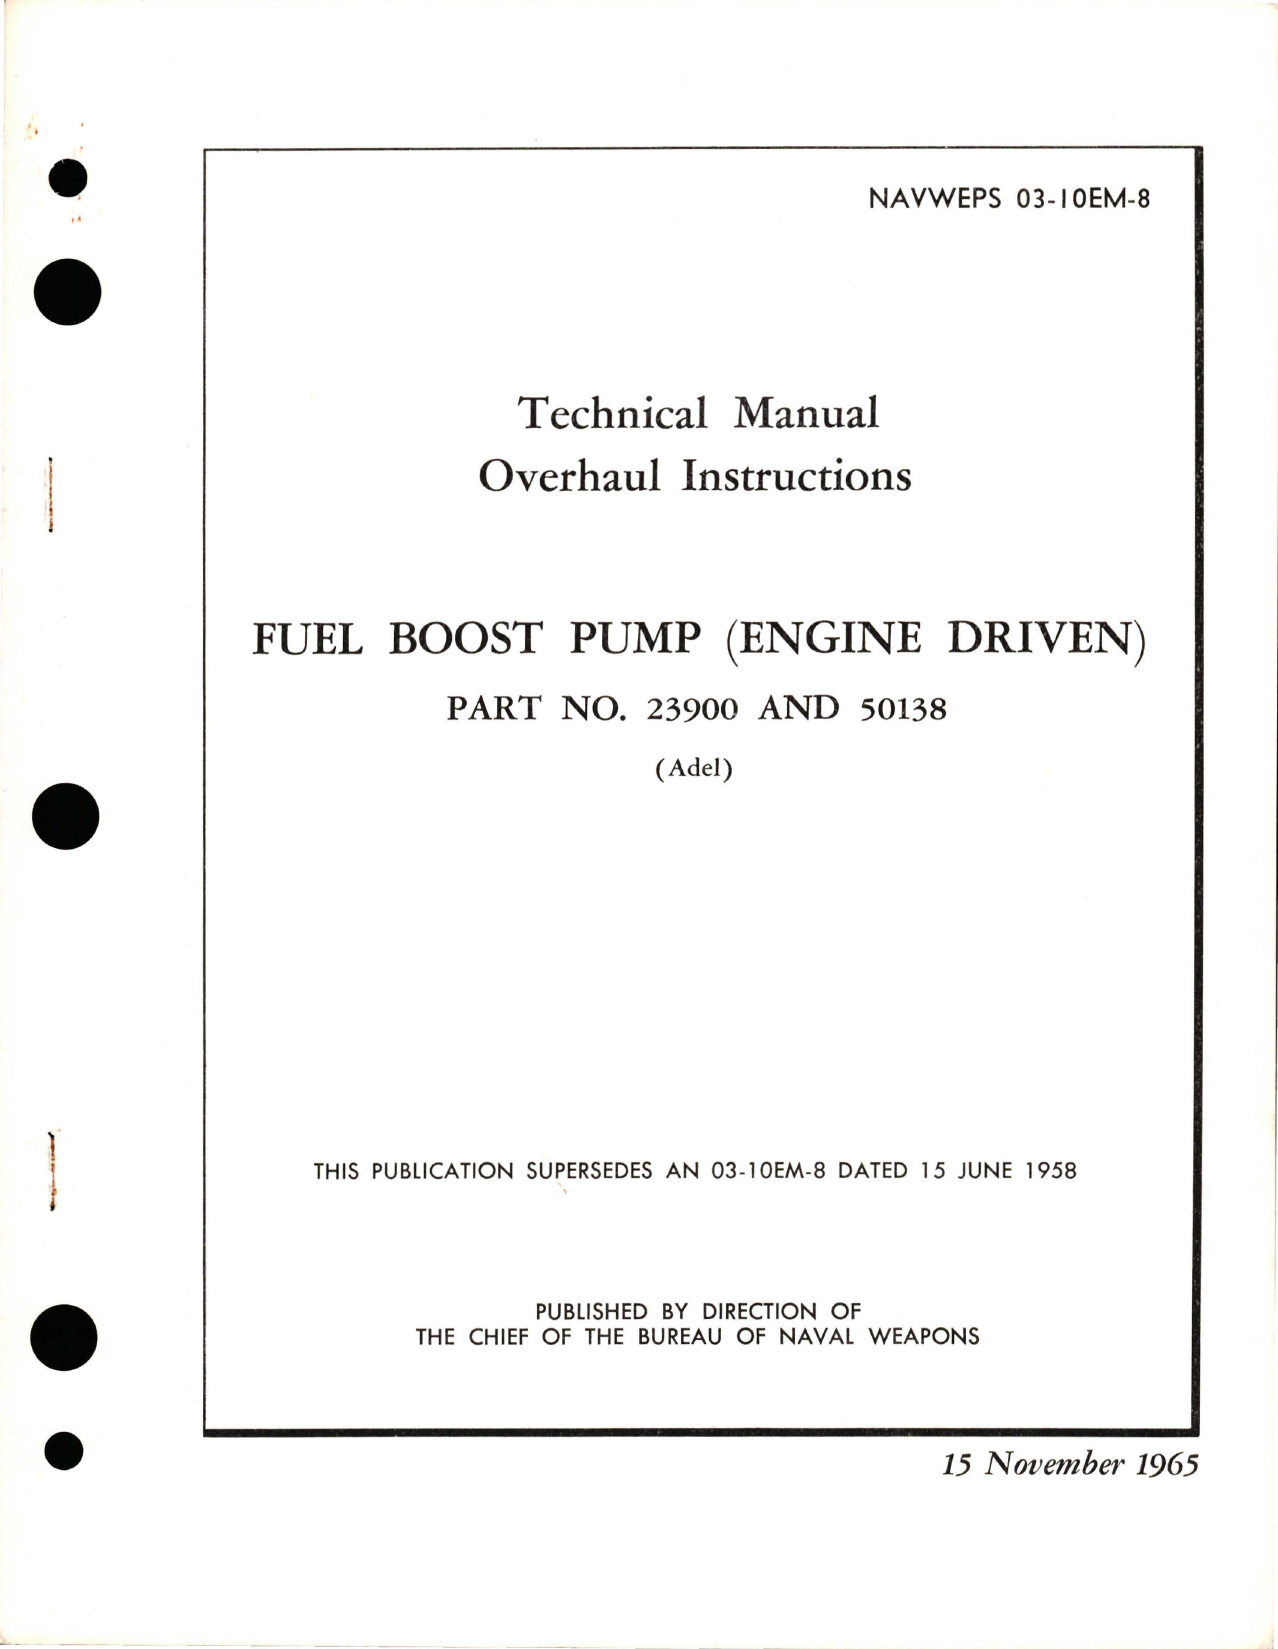 Sample page 1 from AirCorps Library document: Overhaul Instructions for Fuel Boost Pump (Engine Driven) - Part 23900 and 50138 